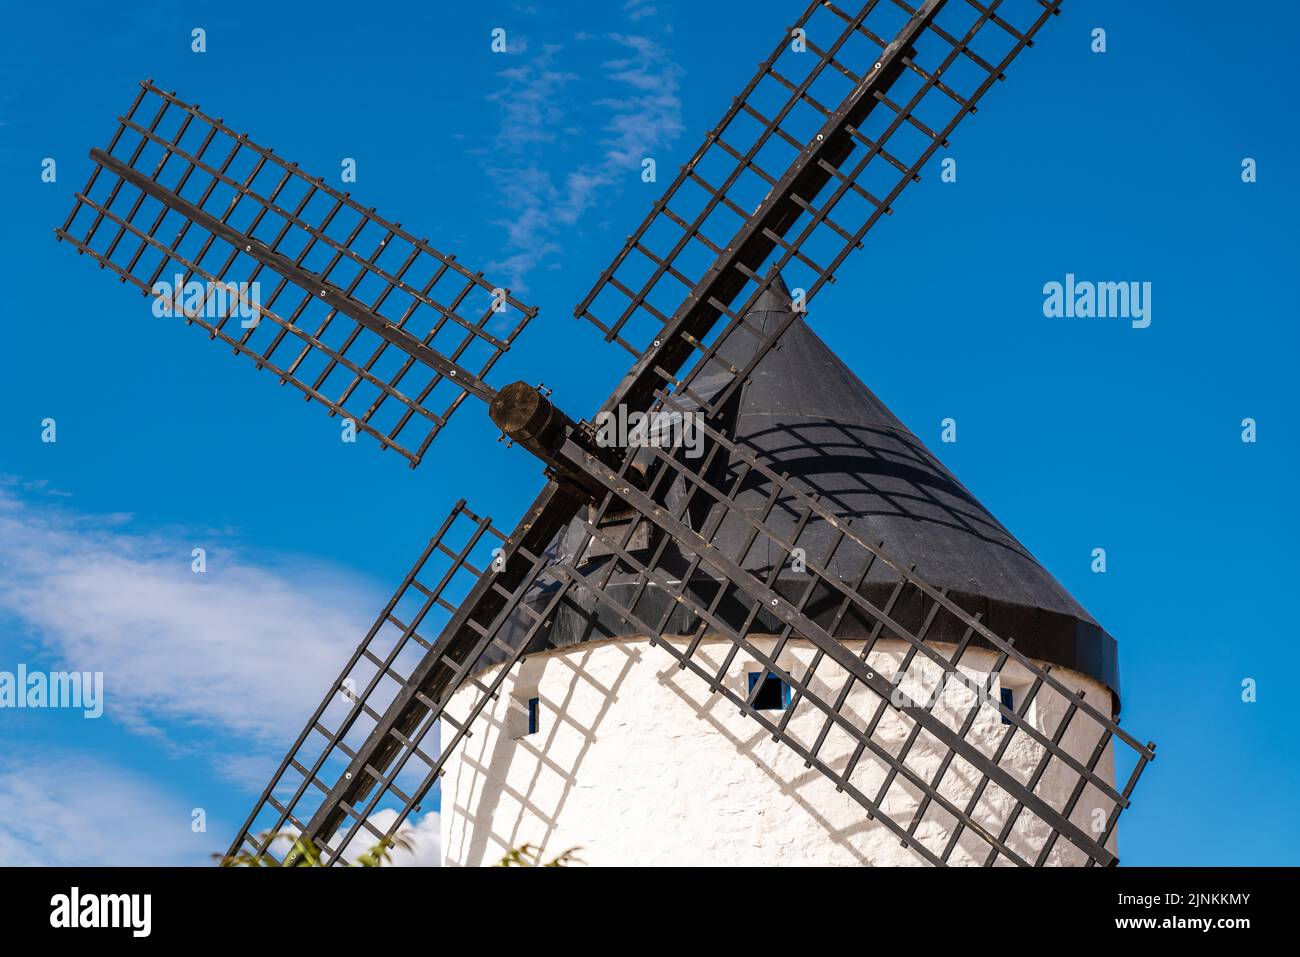 Beautiful windmill isolated in top of a hill near to Consuegra city in Castilla-La Mancha - Spain. Cloudy day. Giants Land and story of Don Quixote Stock Photo